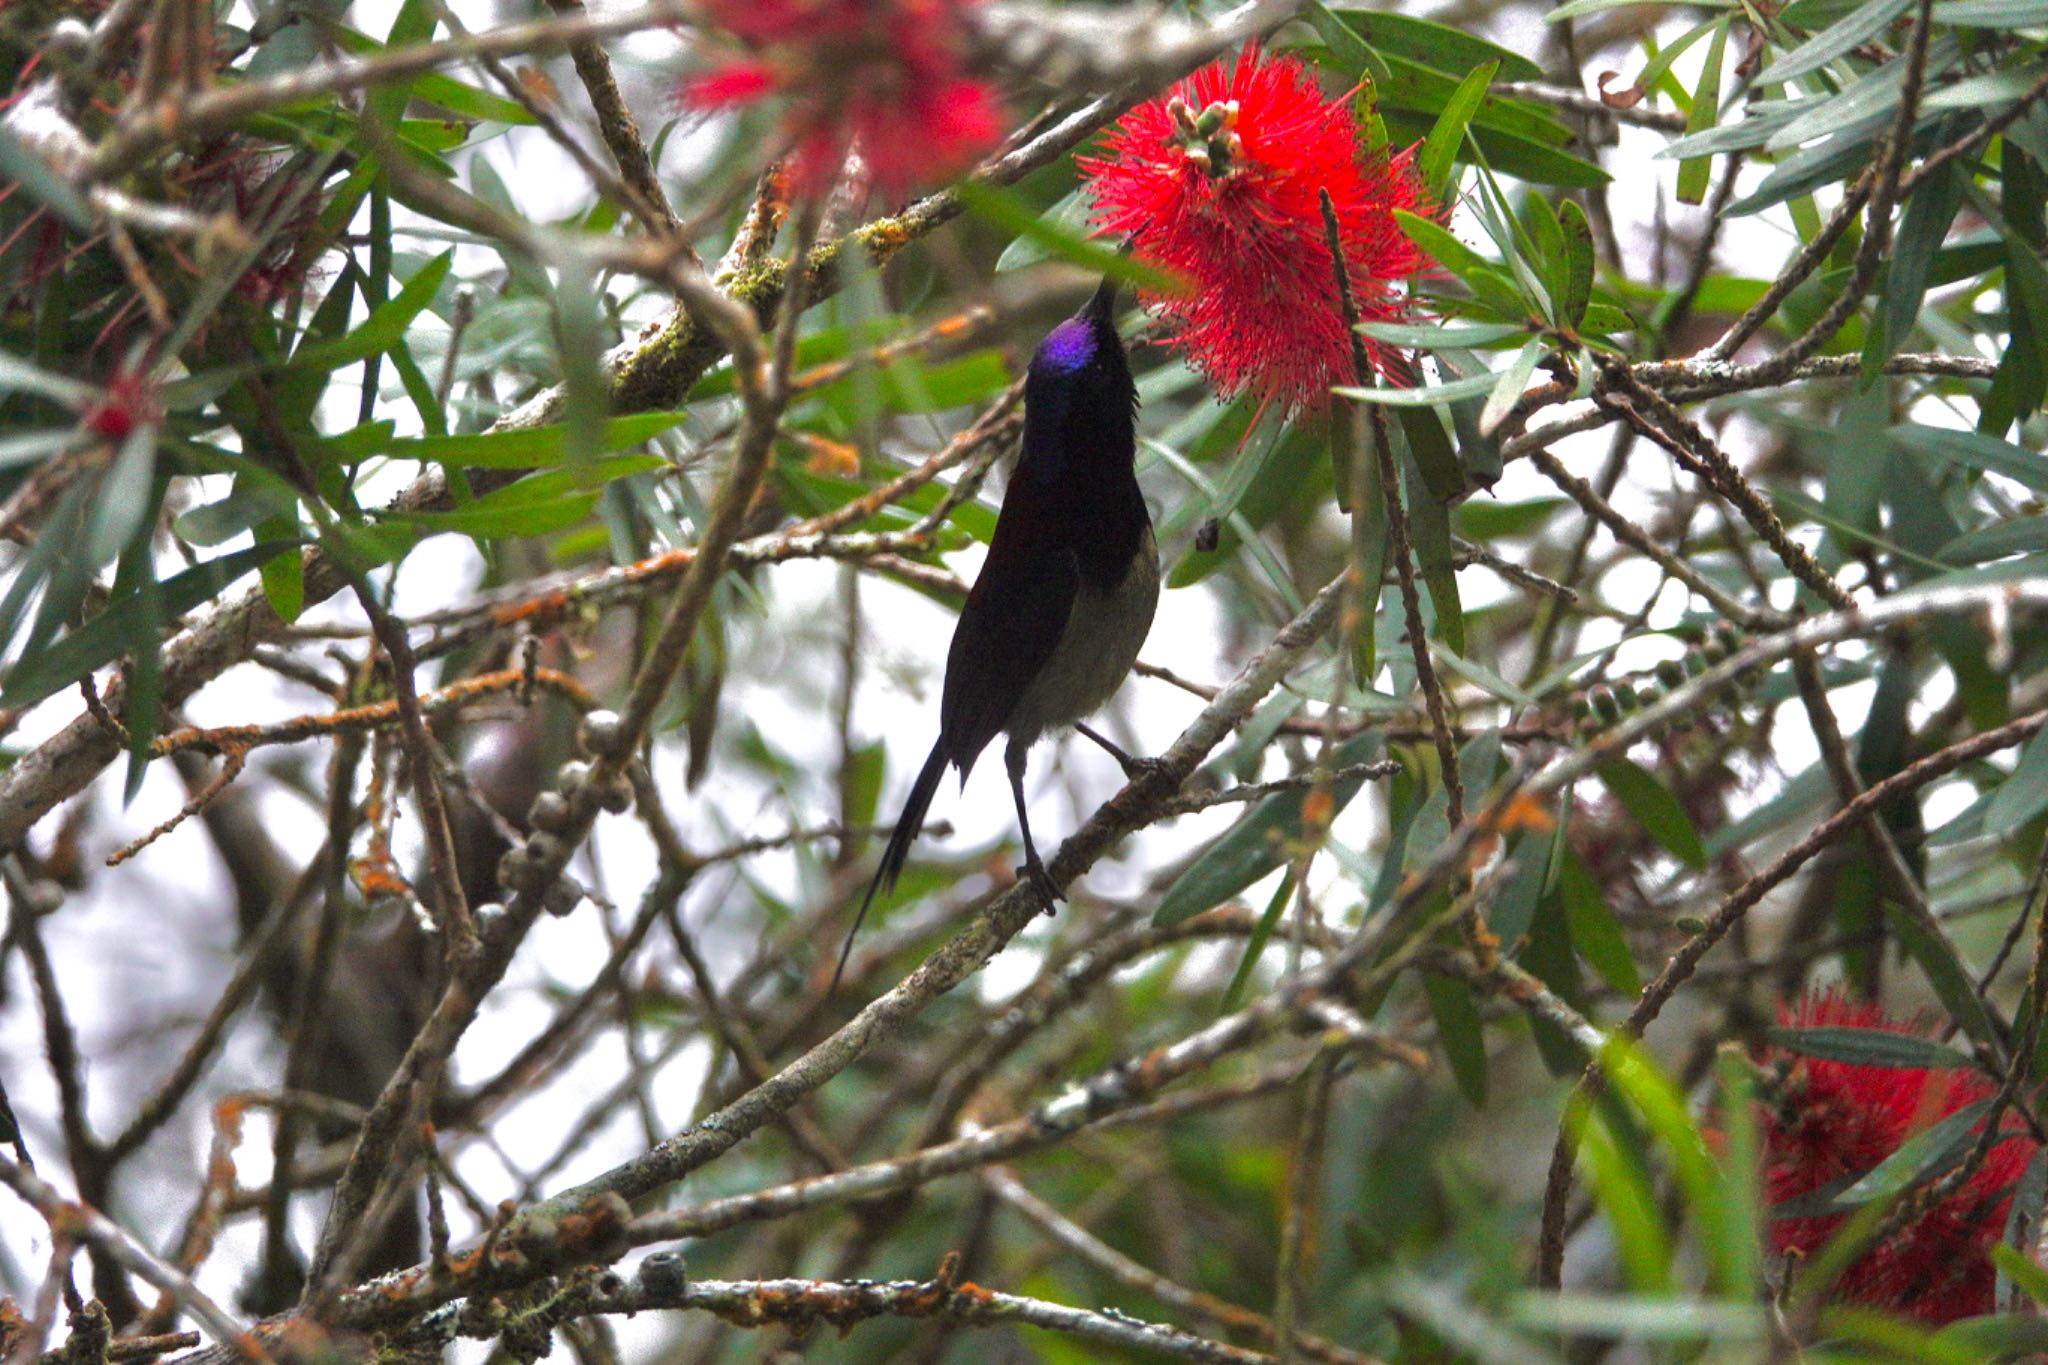 Photo of Black-throated Sunbird at Fraser's Hill by のどか